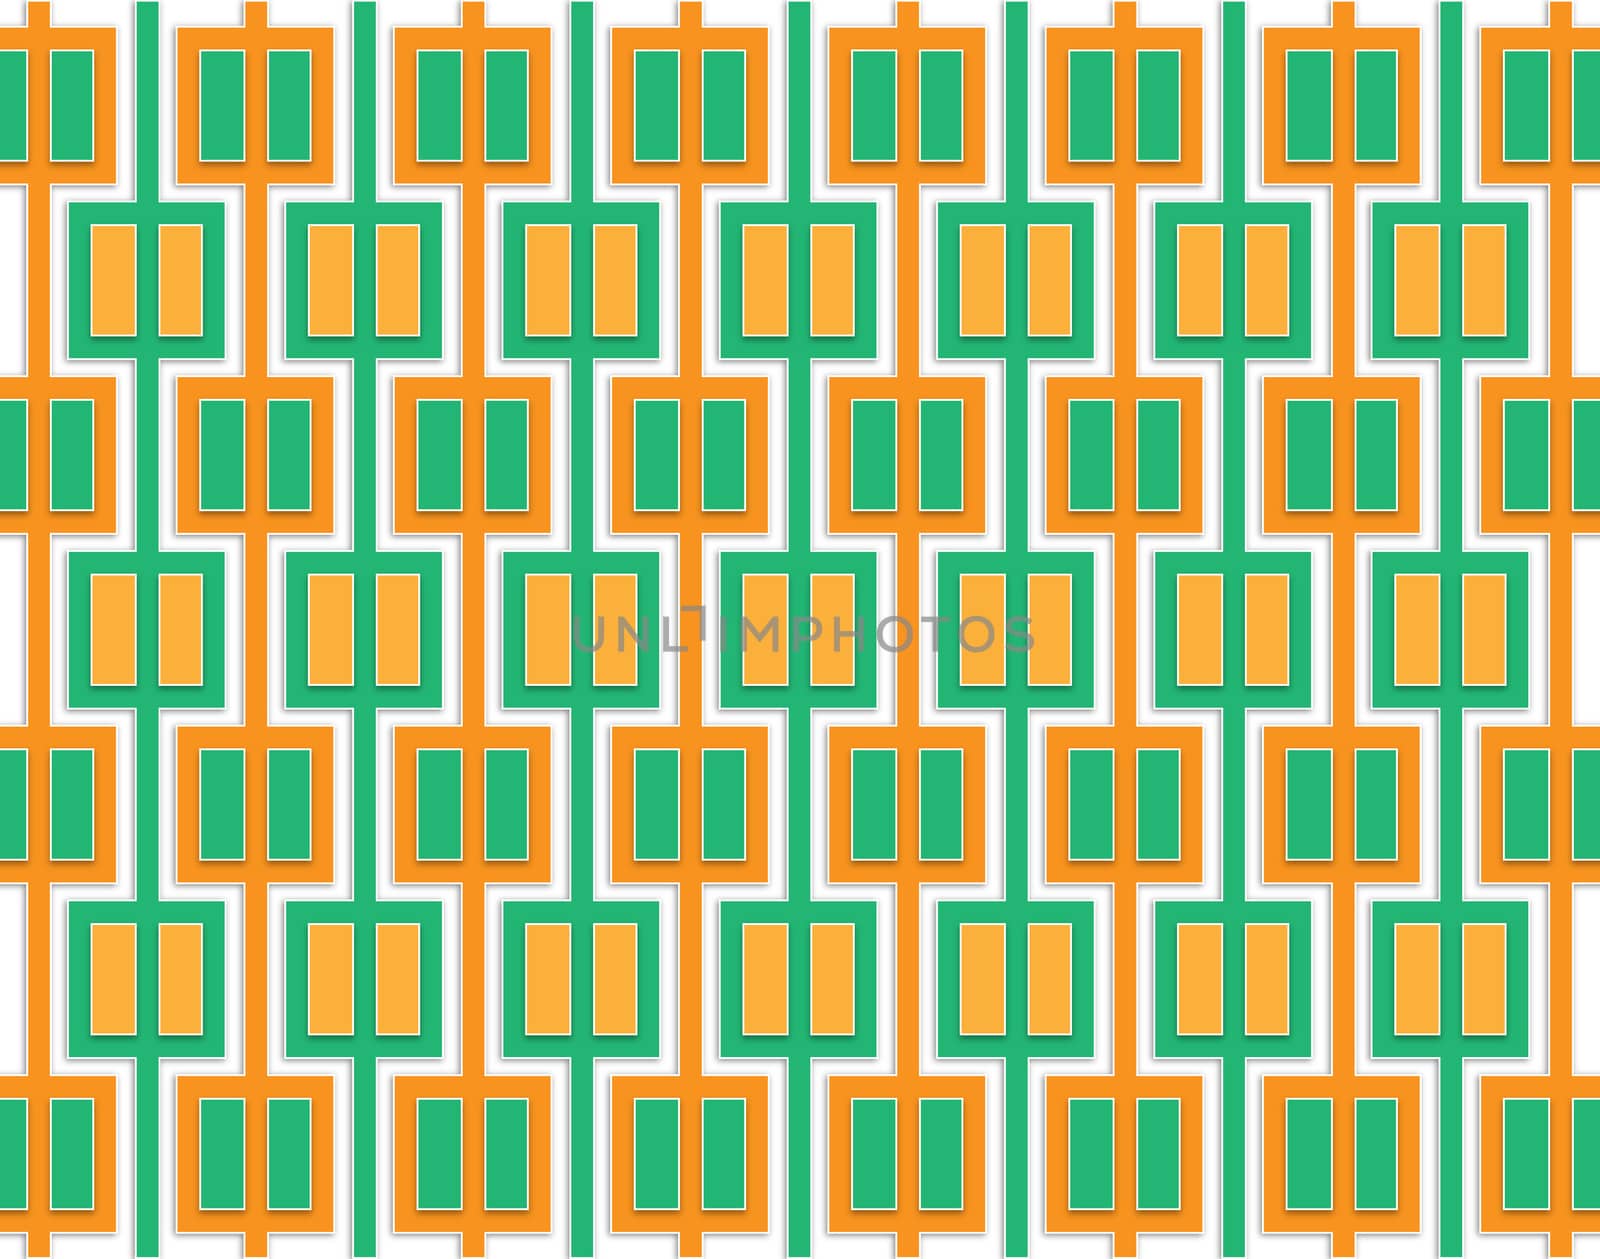 Abstract pattern of orange and green squares regularly distributed over the area